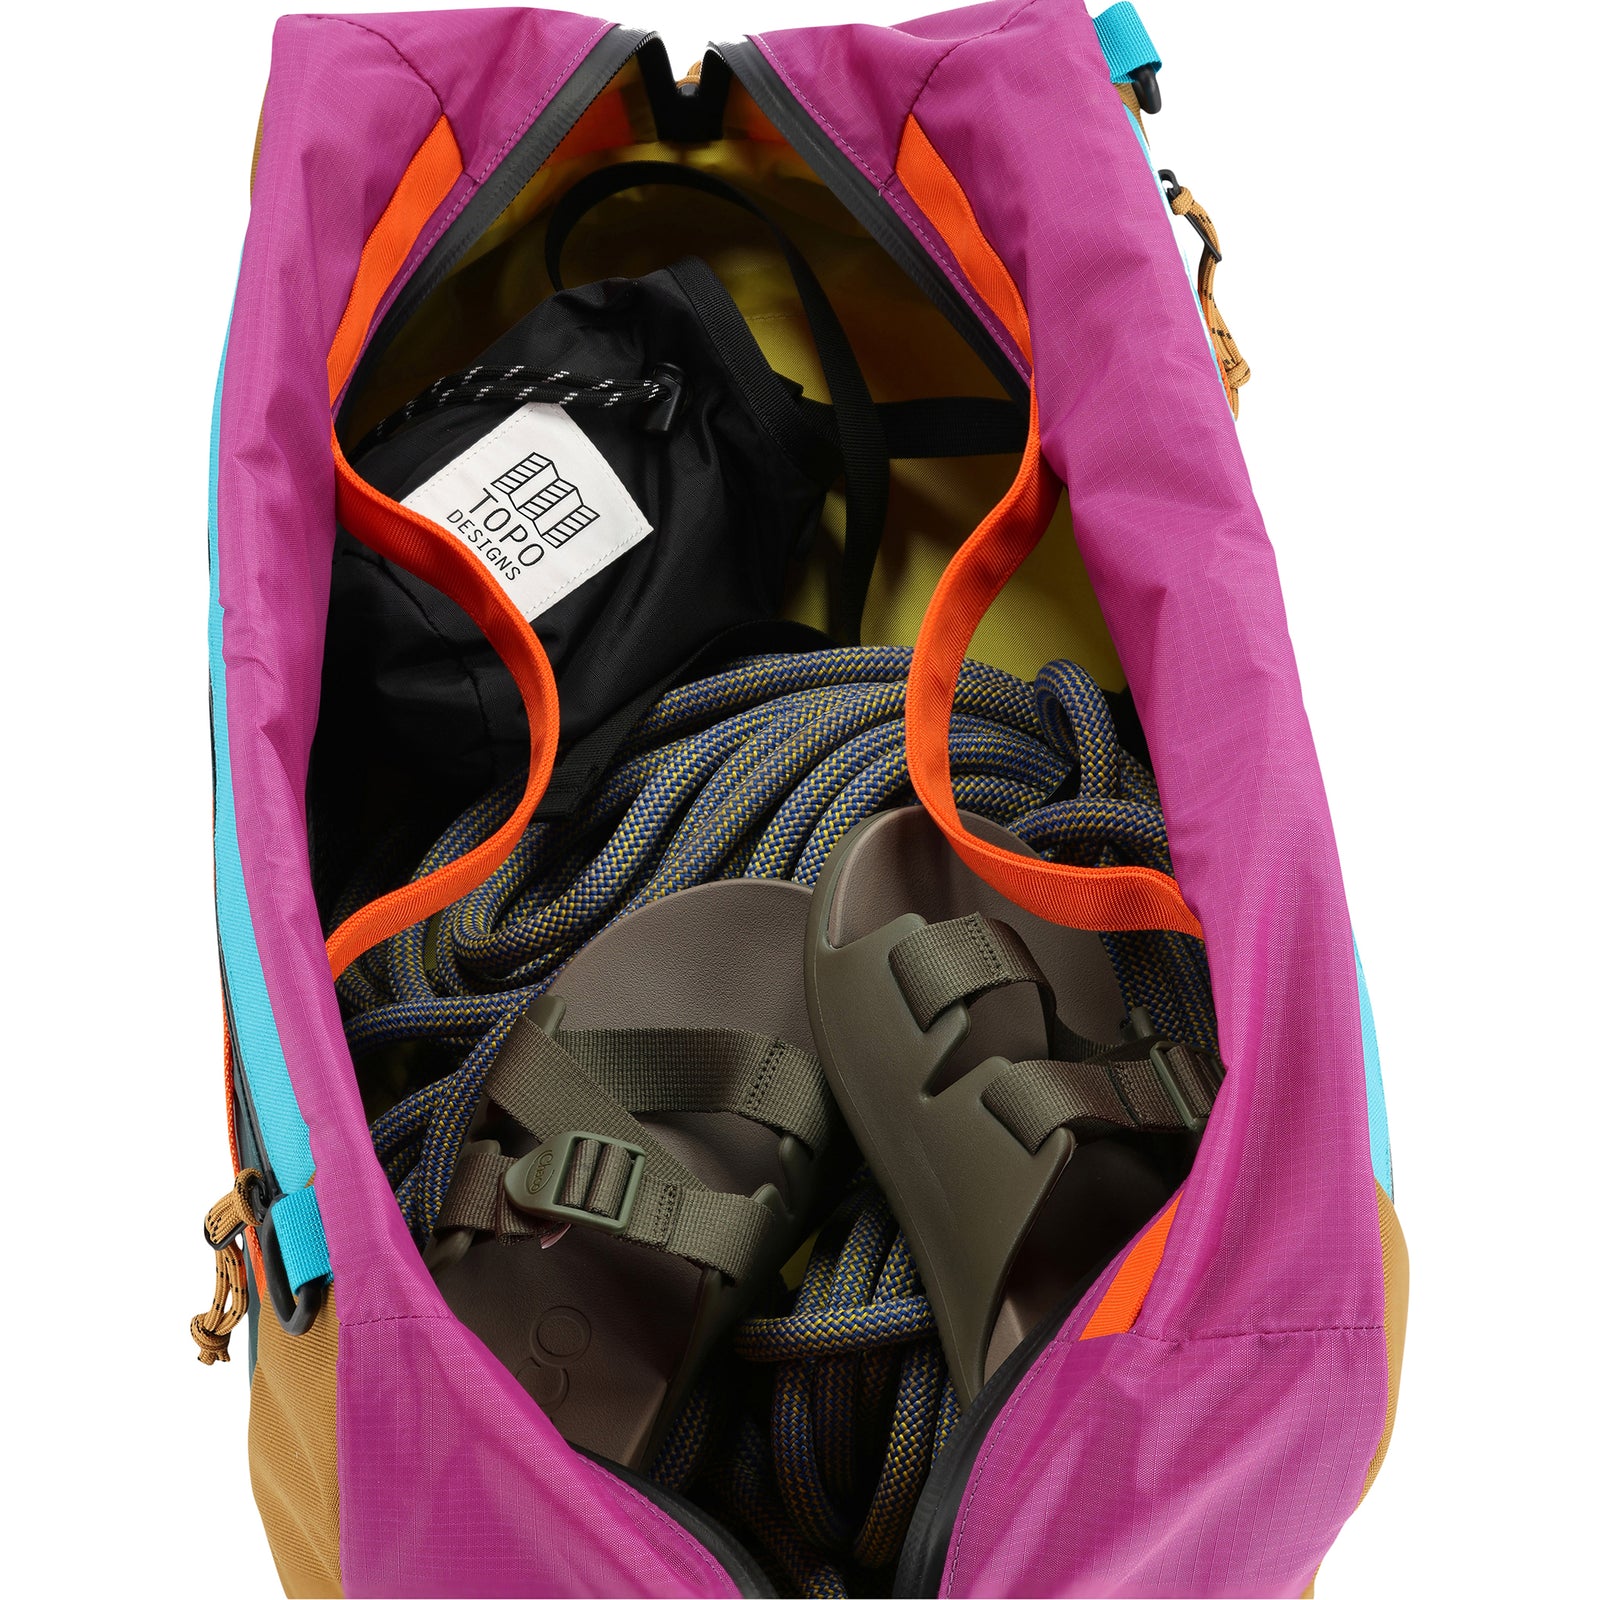 Photo of interior of Topo Designs Mountain Duffel 40L backpack gear bag in recycled "Botanic Green / Grape" nylon.